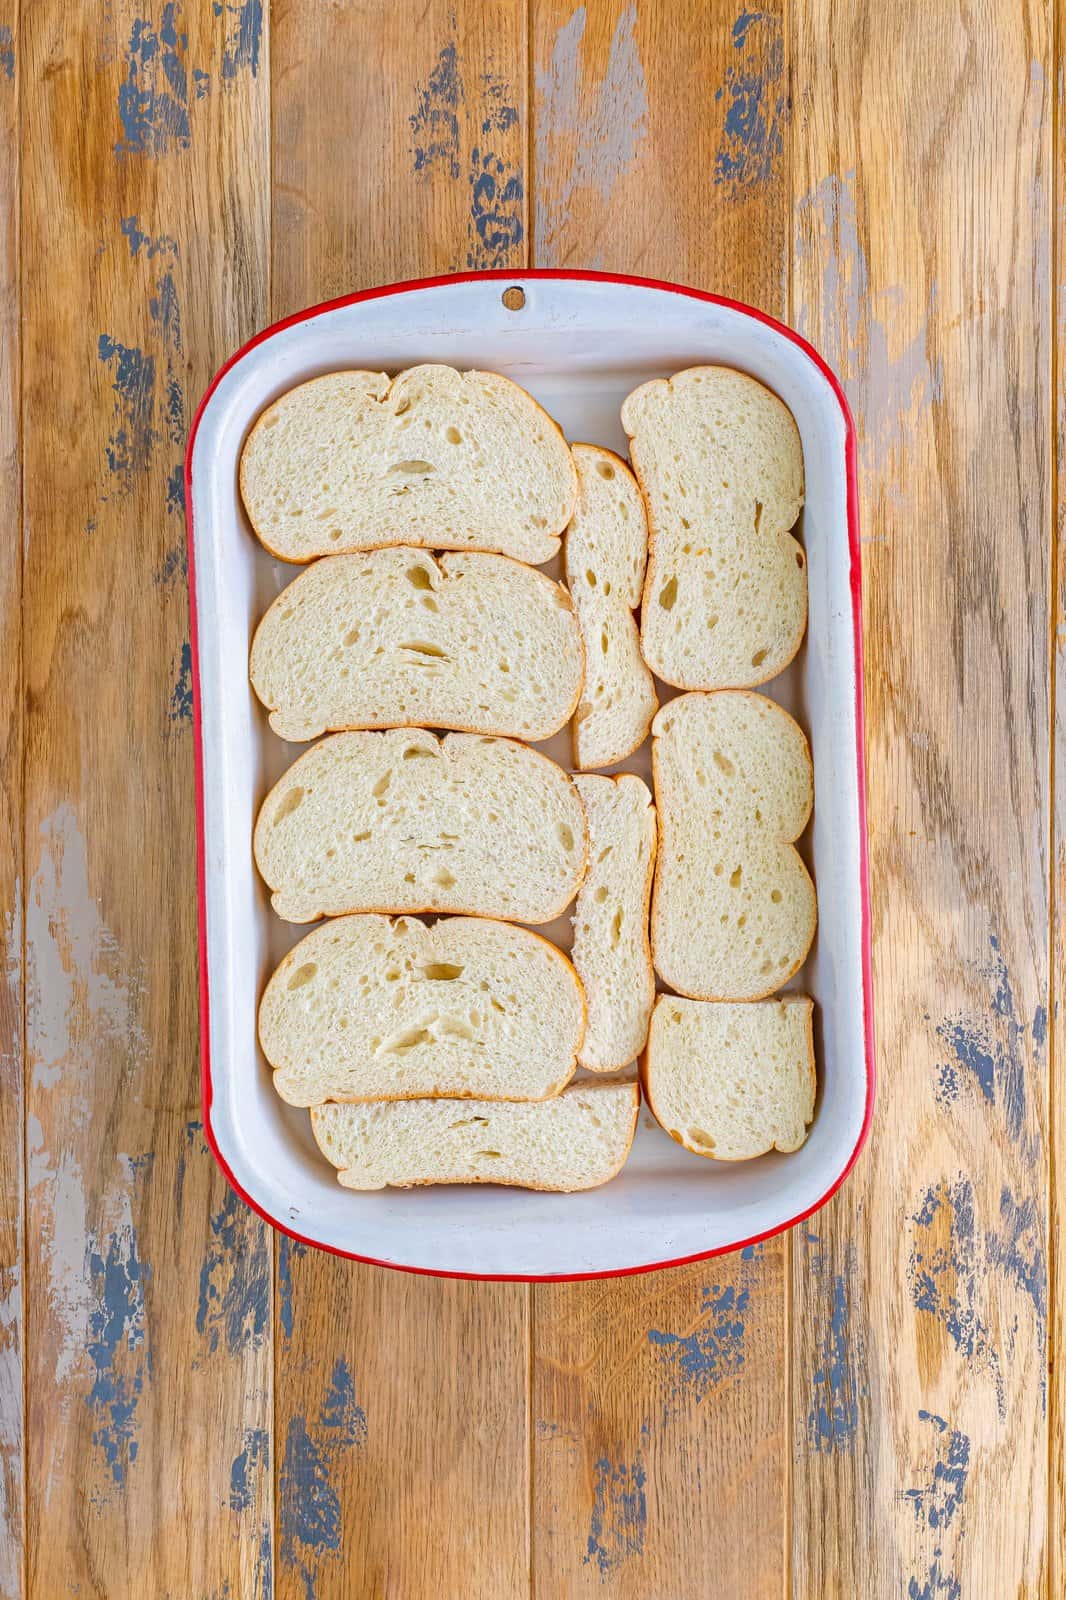 sliced Italian bread shown in an even layer in a baking dish.